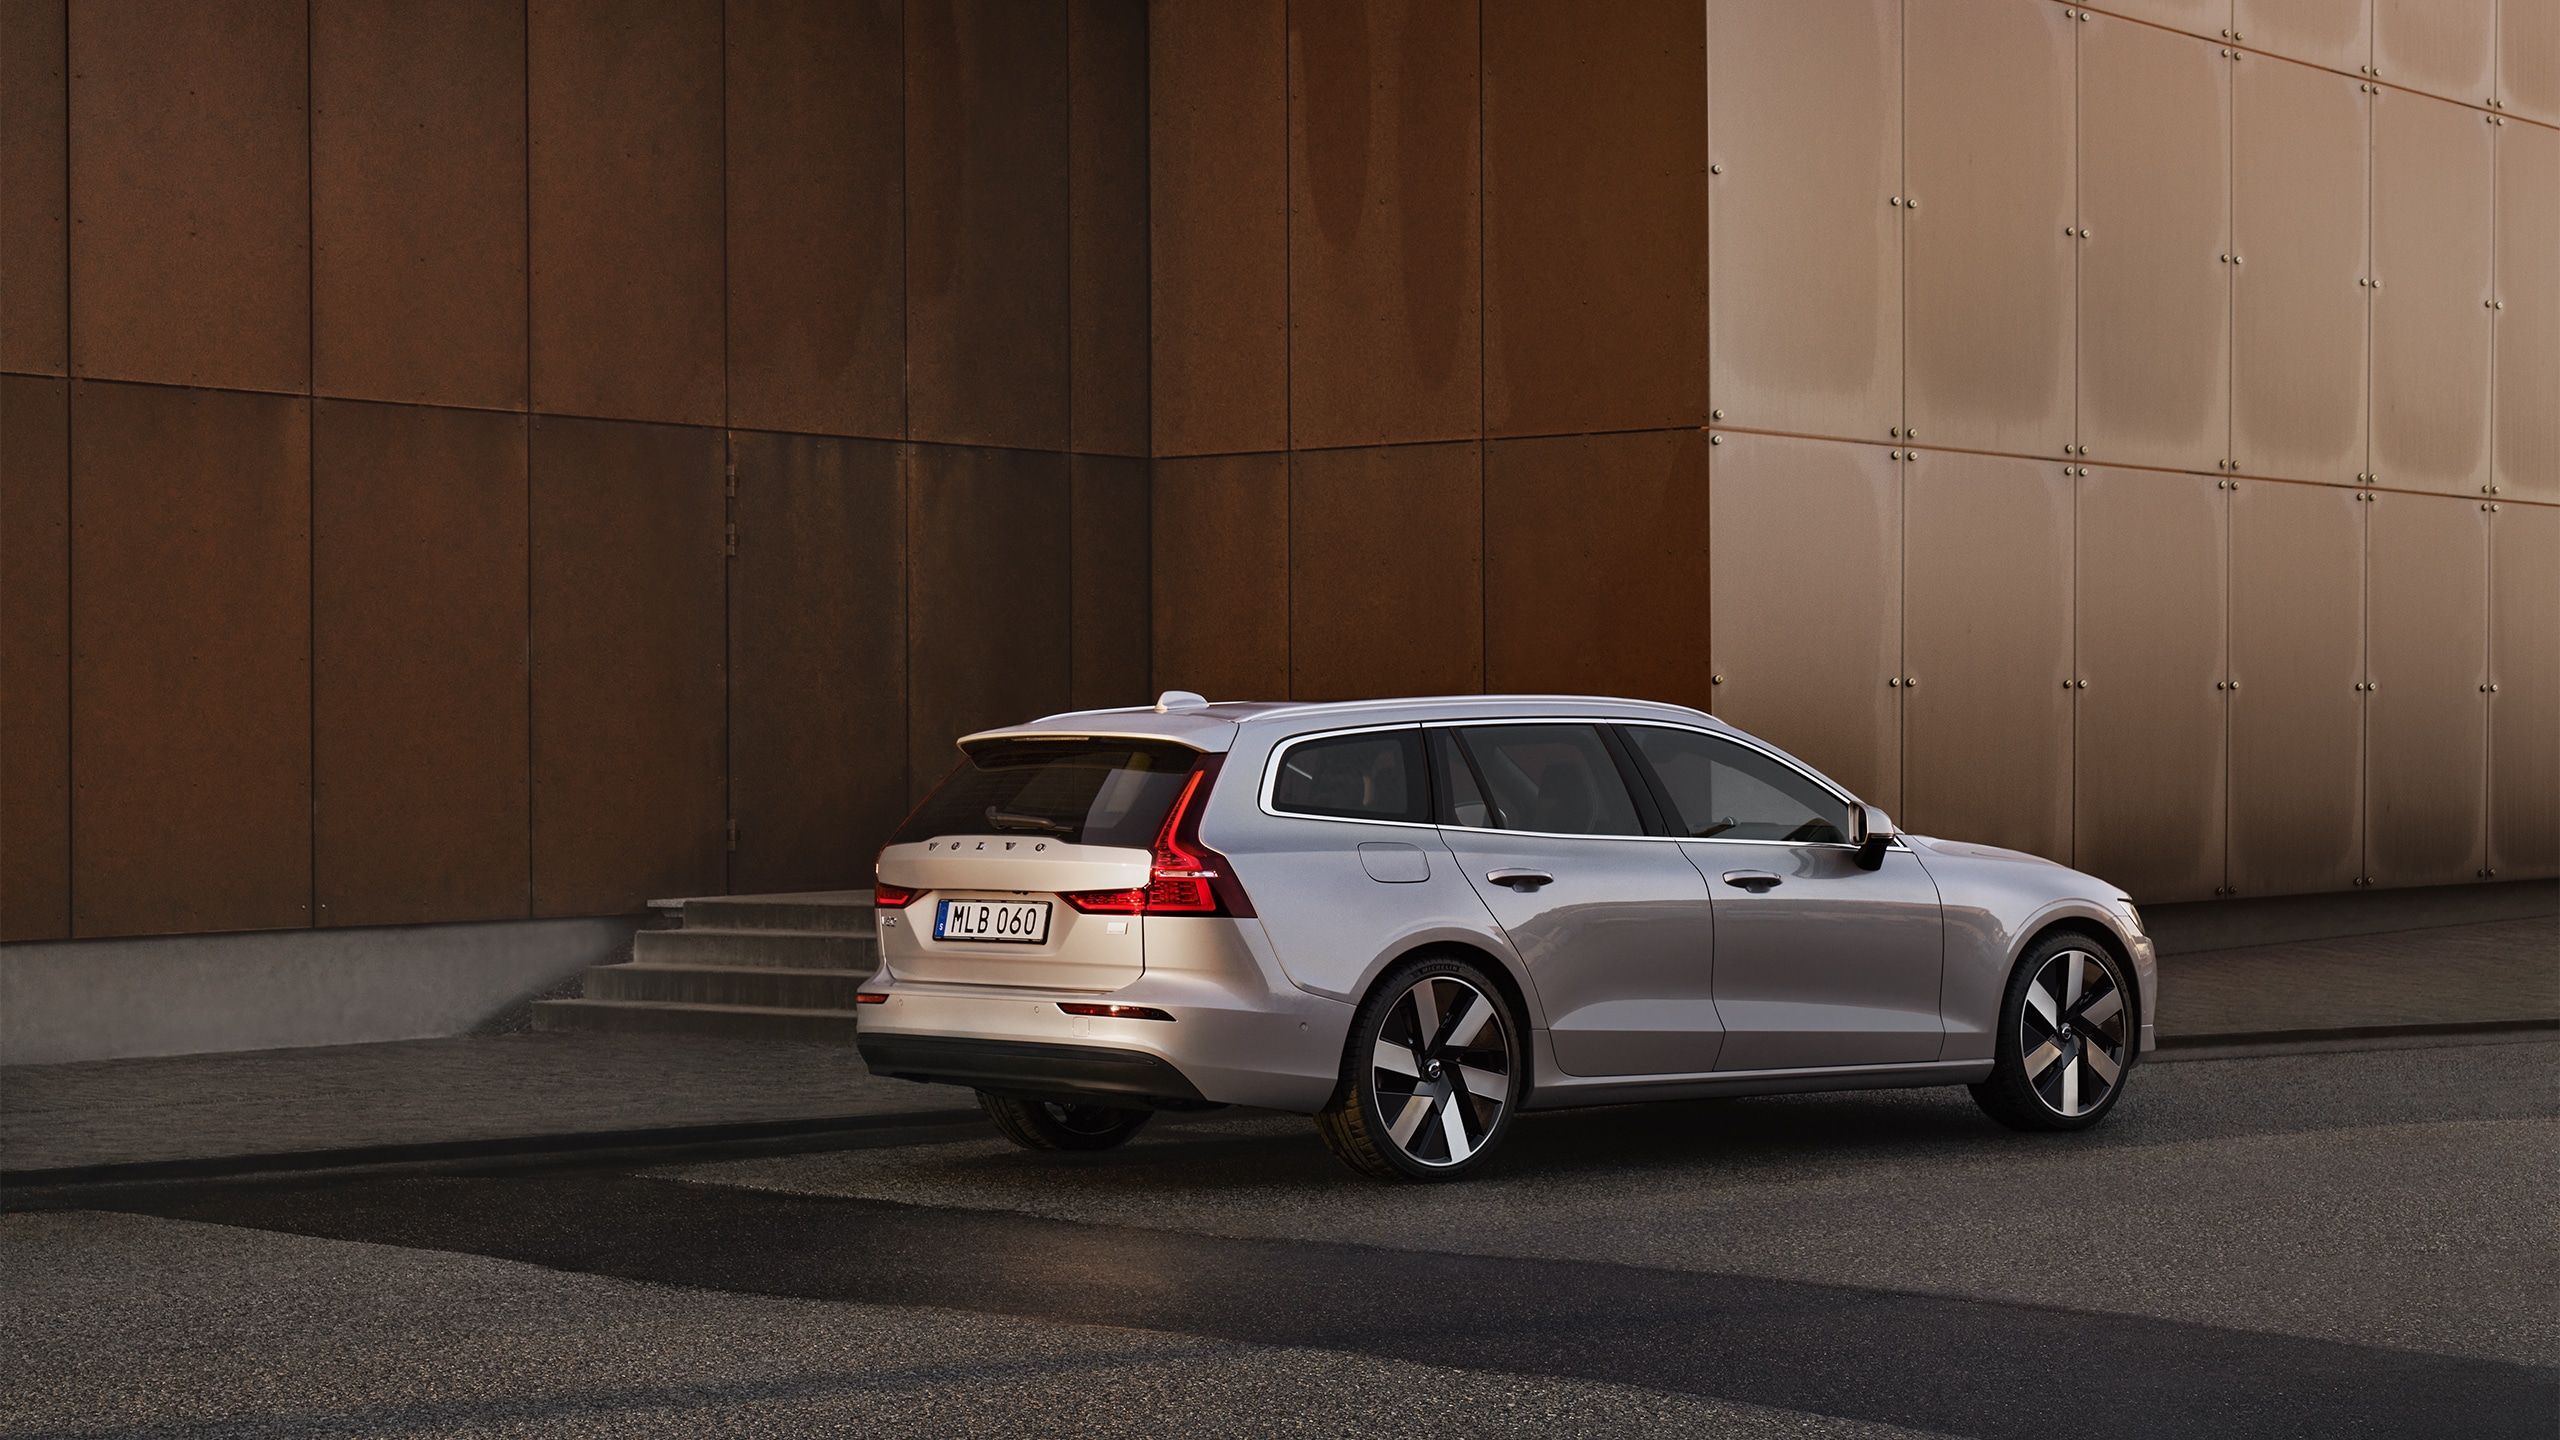 Meet our V60 Recharge plugin hybrid estate with Google builtin. Learn